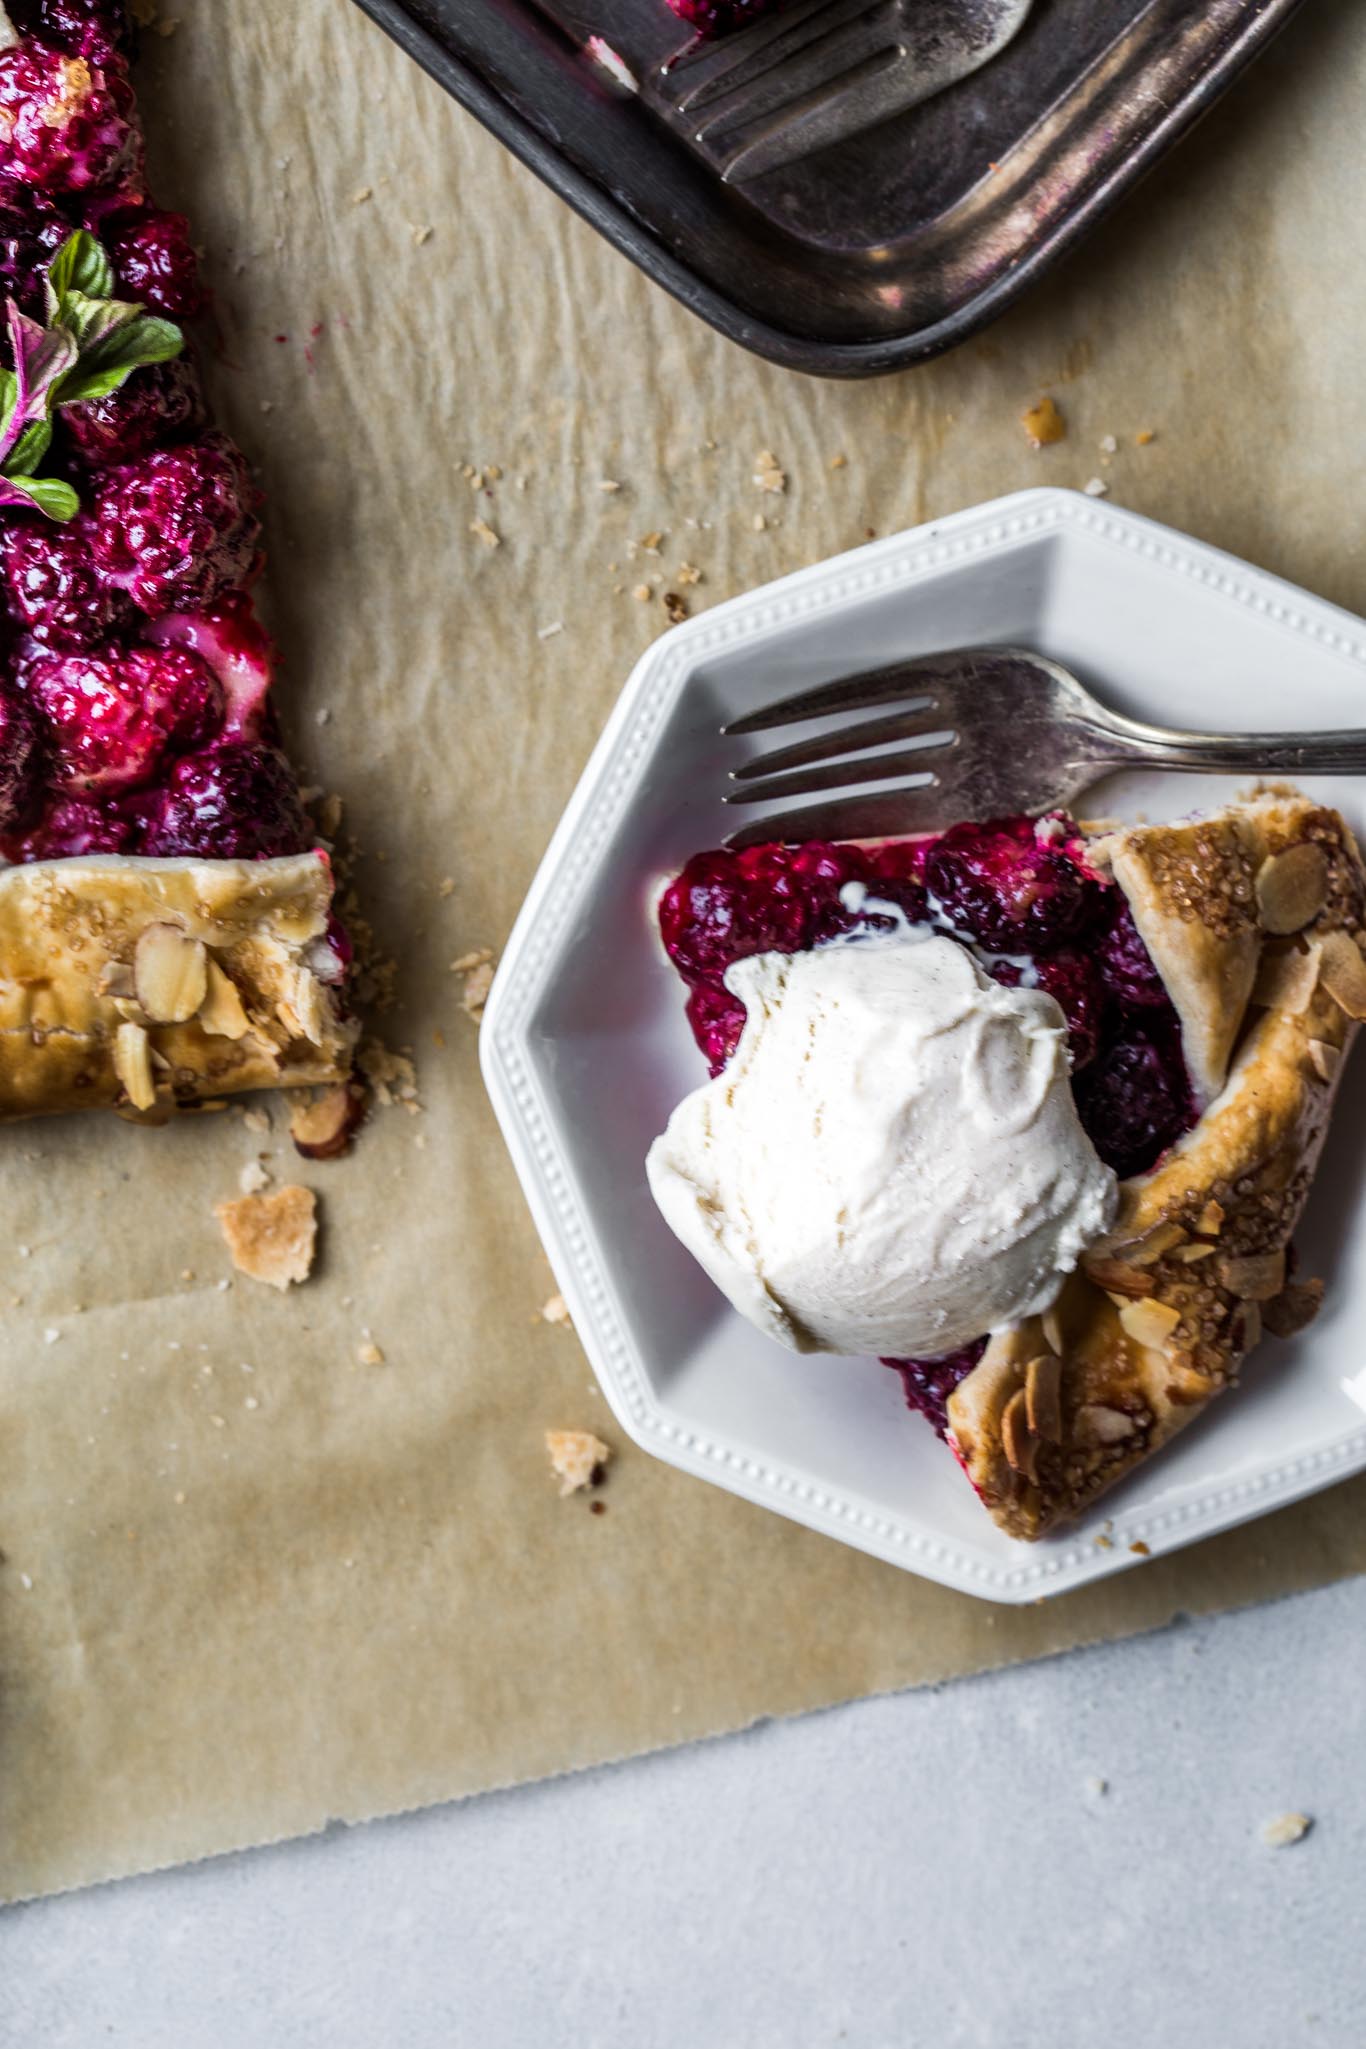 Piece of blackberry galette with scoop of ice cream.